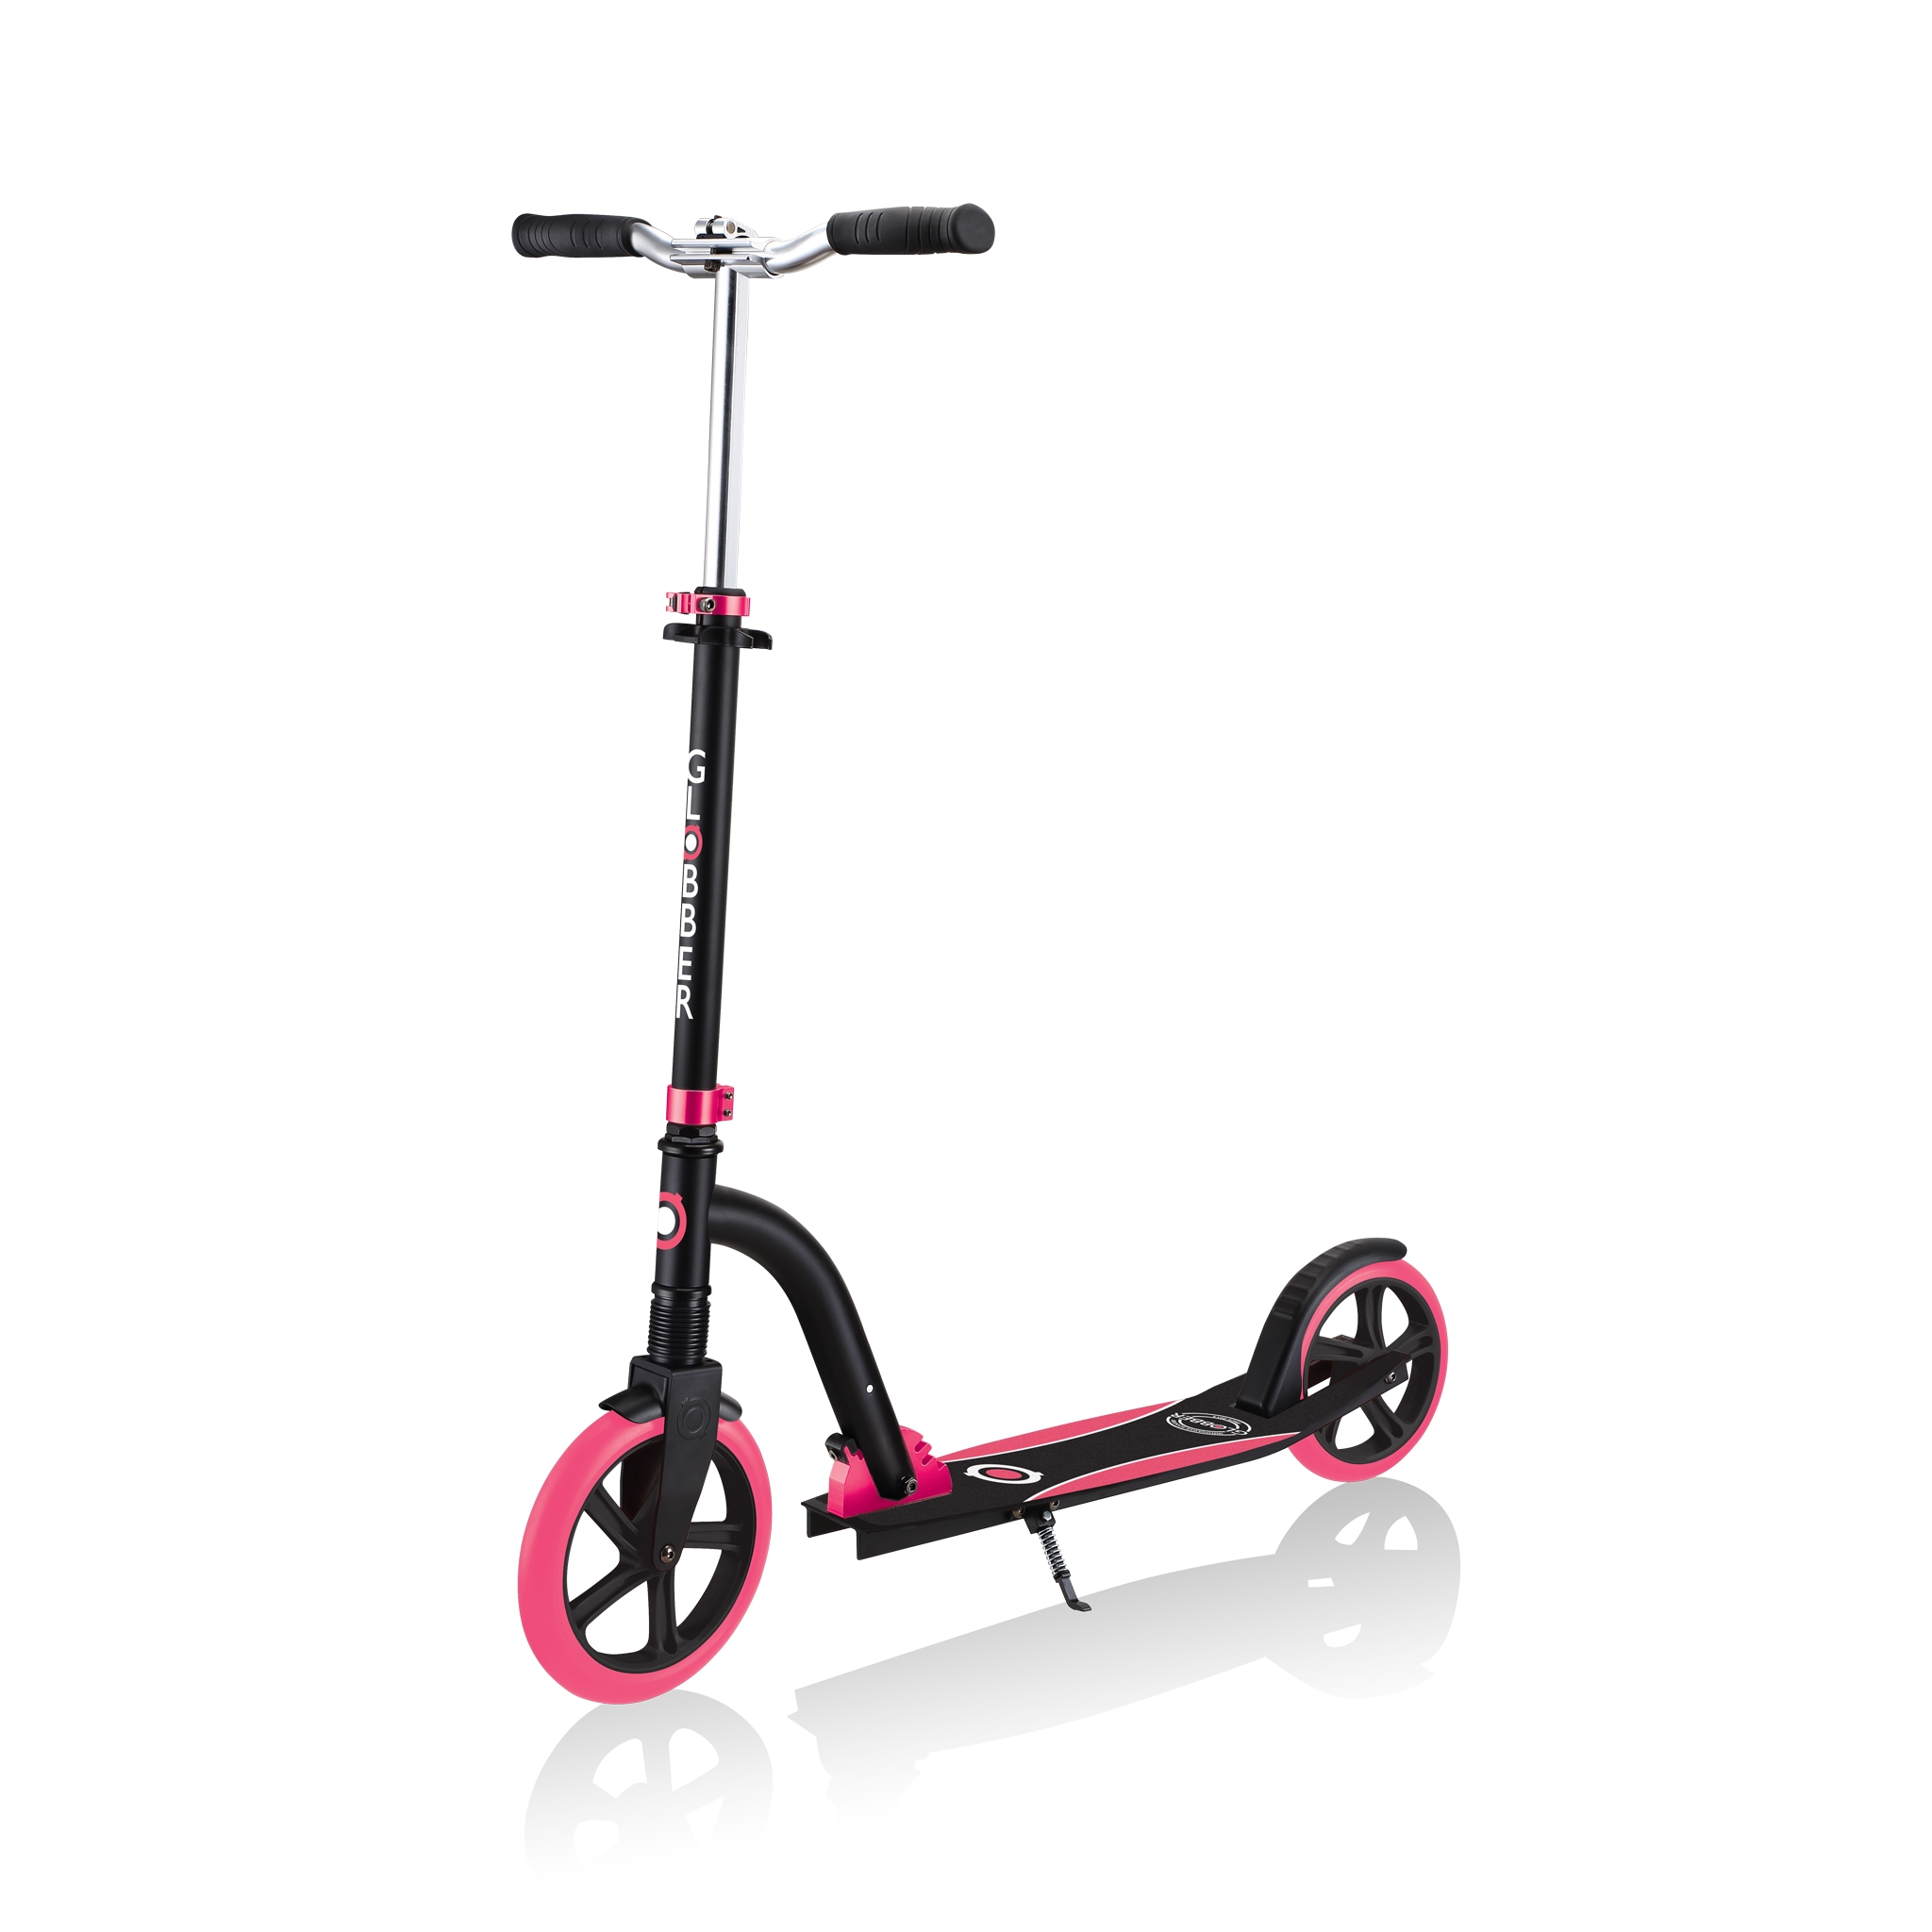 NL-230-205-DUO-best-big-wheel-scooters-for-kids-and-teens 8